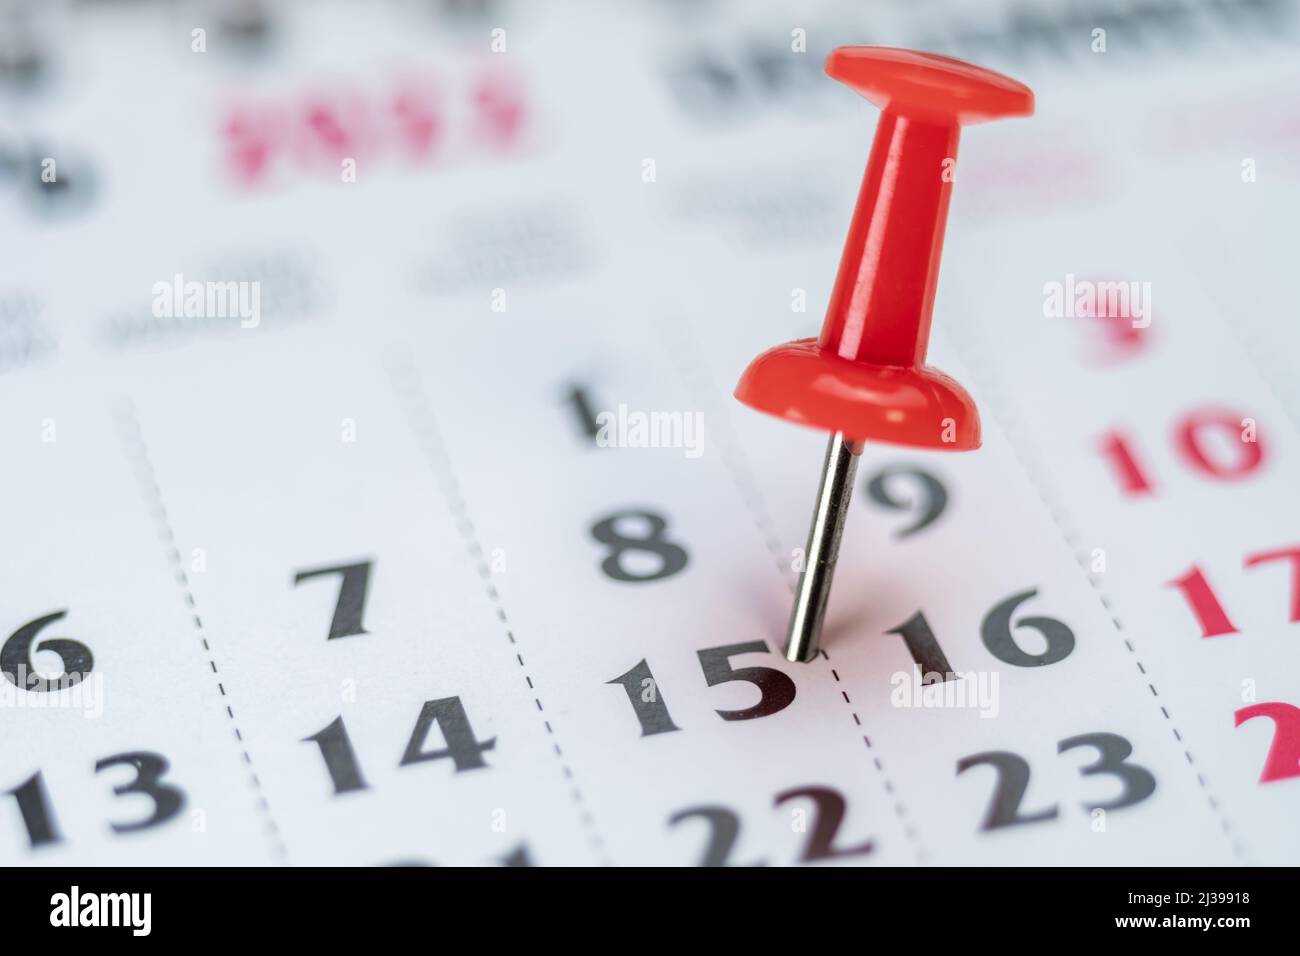 Red push pin on calendar 15th day of the month, mark the Event day with a Pin. Pin on calendar day fifteen, date number 15. Fifteenth day of the month Stock Photo